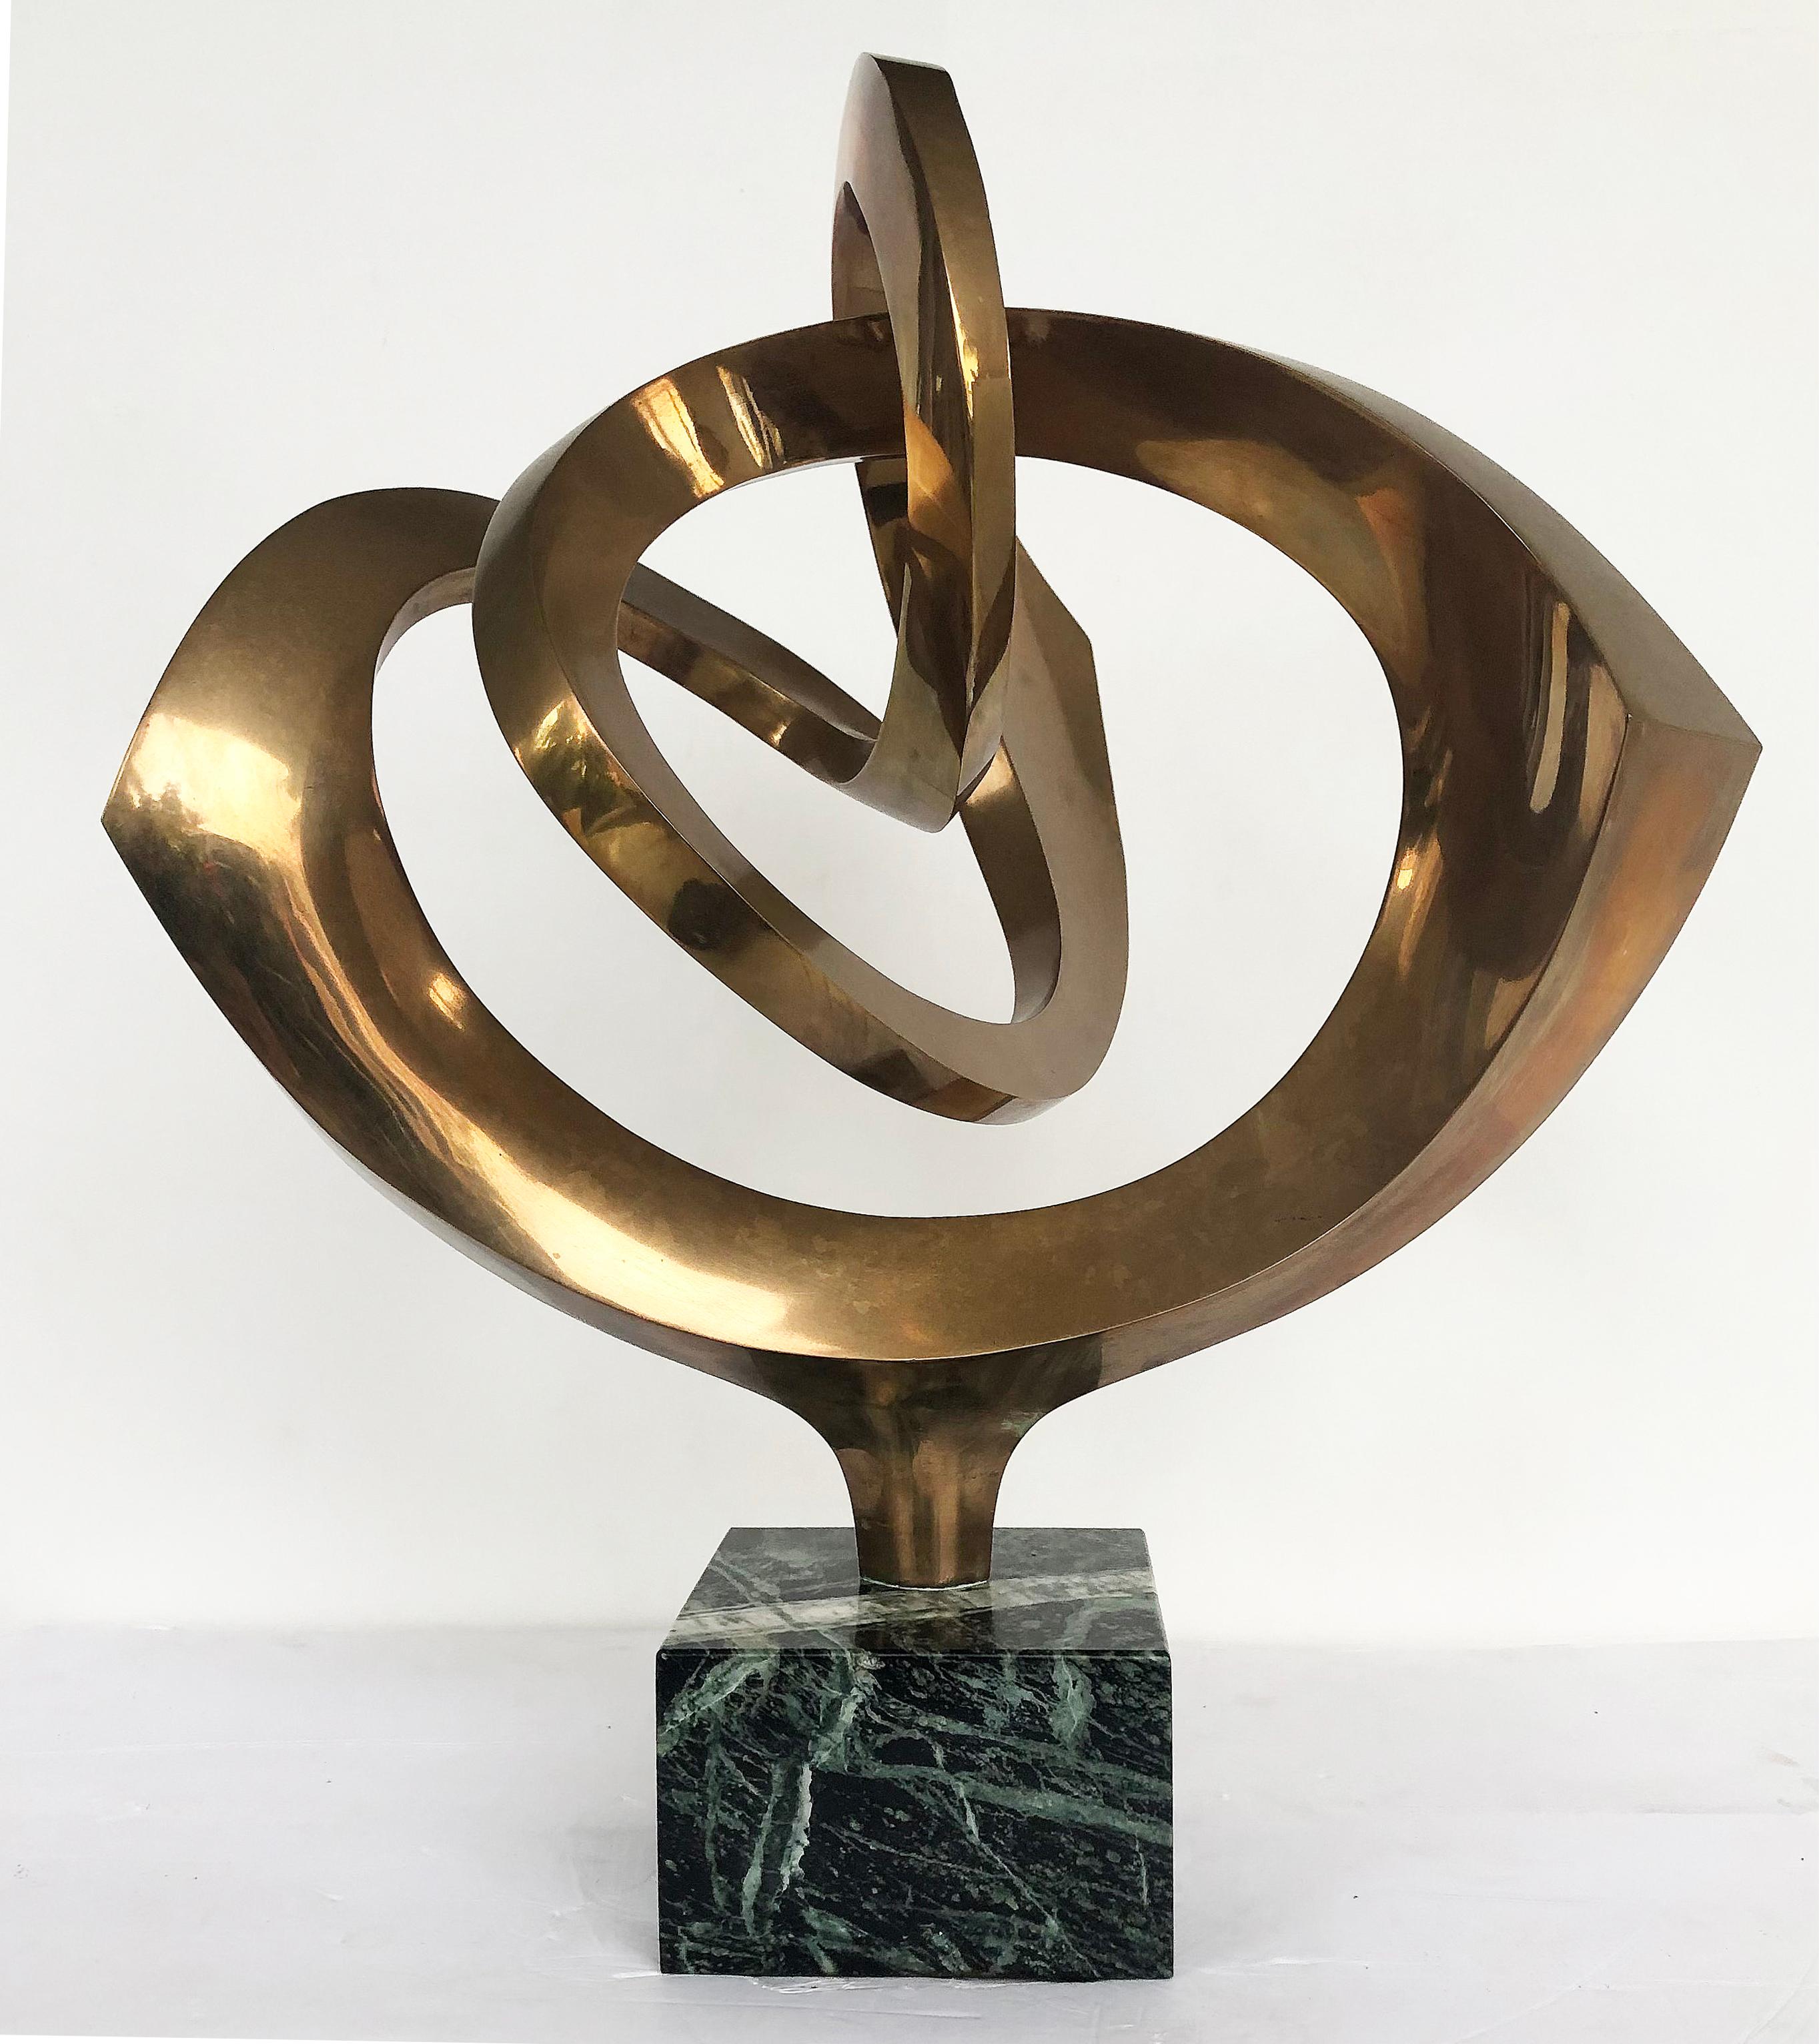 Robert J Mitchell Abstract sculpture, polished brass on marble base

Offered for sale is a rare modernist abstract sculpture by the British artist Robert J. Mitchell (b.1930). This special abstract work is created in polished brass and presented